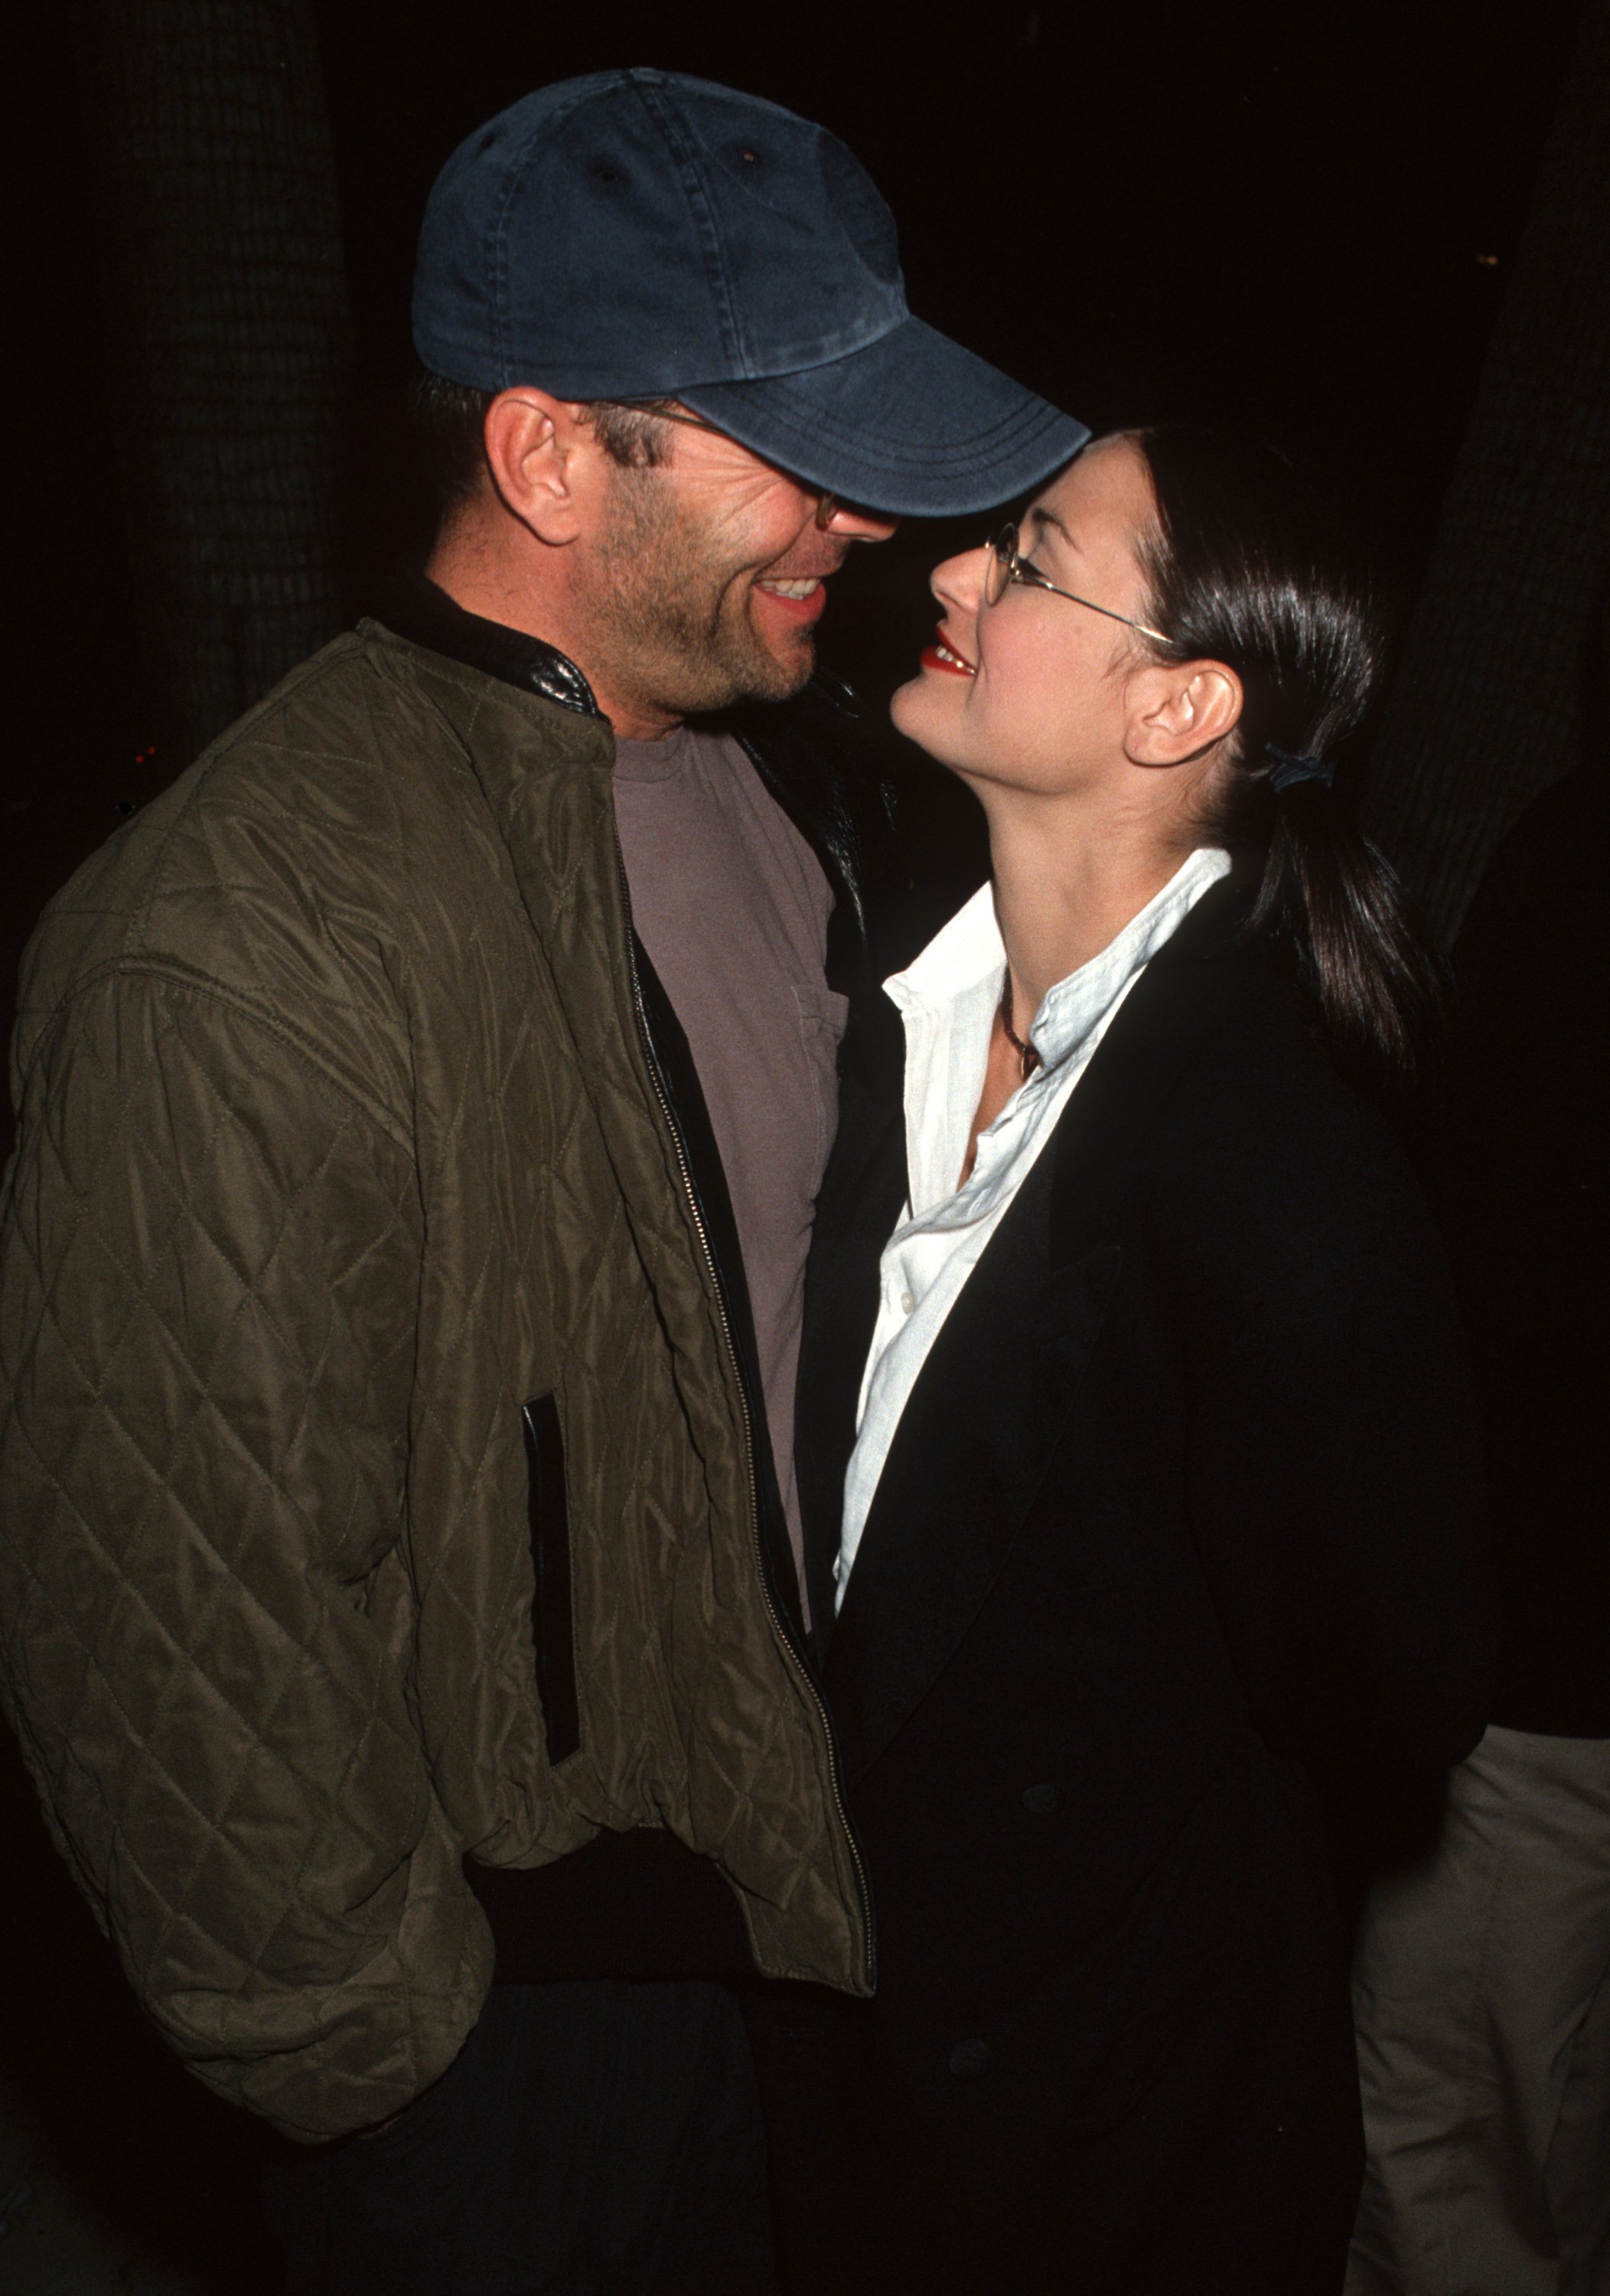 Bruce Willis and Demi Moore during "Indecent Proposal" Los Angeles VIP Screening